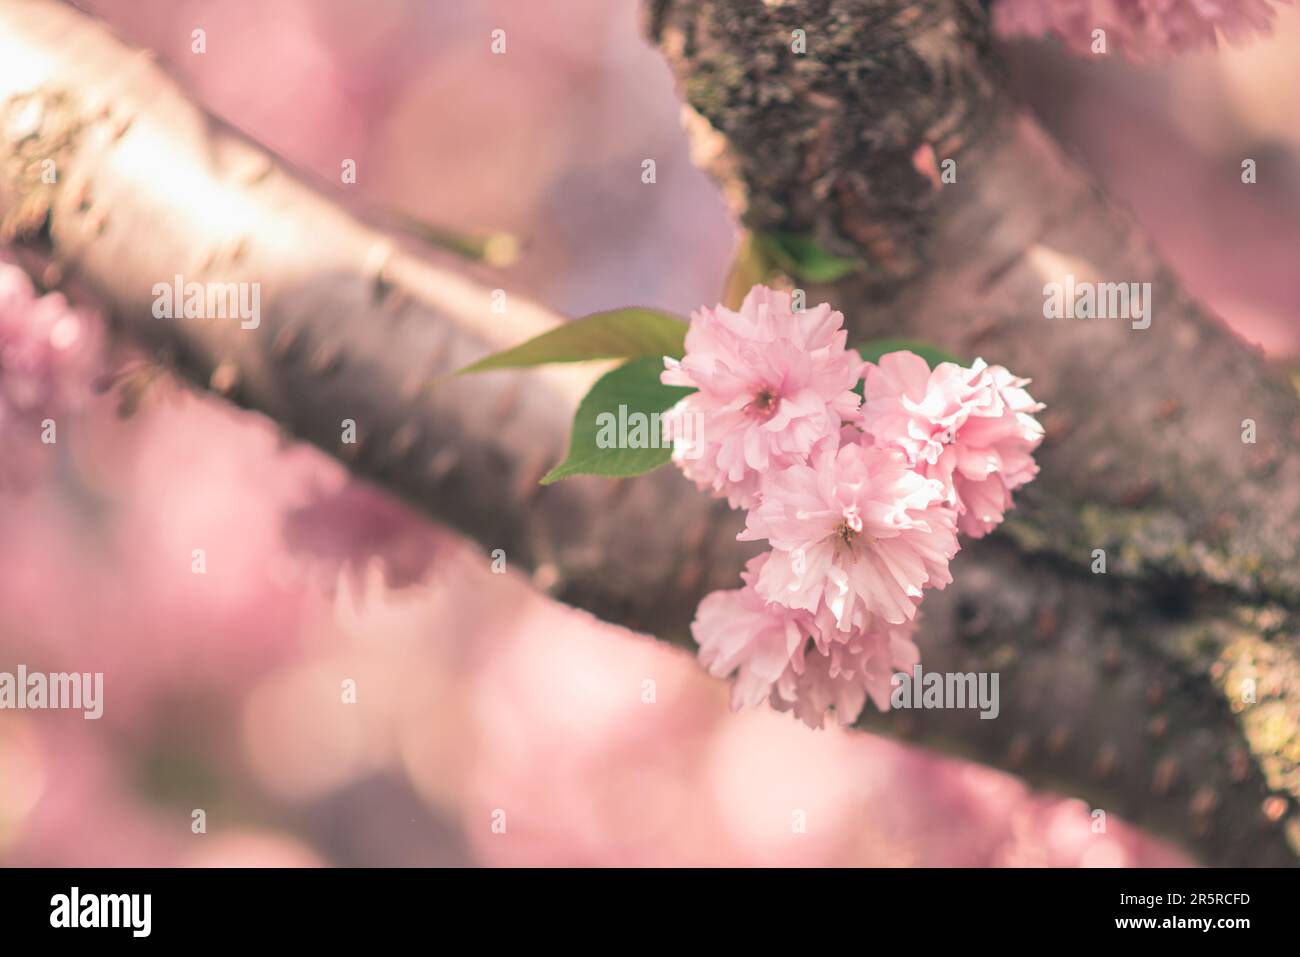 Japanese Flowering Cherry (Prunus serrulata) pink cherry flower blossoms on a tree with soft bokeh background Stock Photo